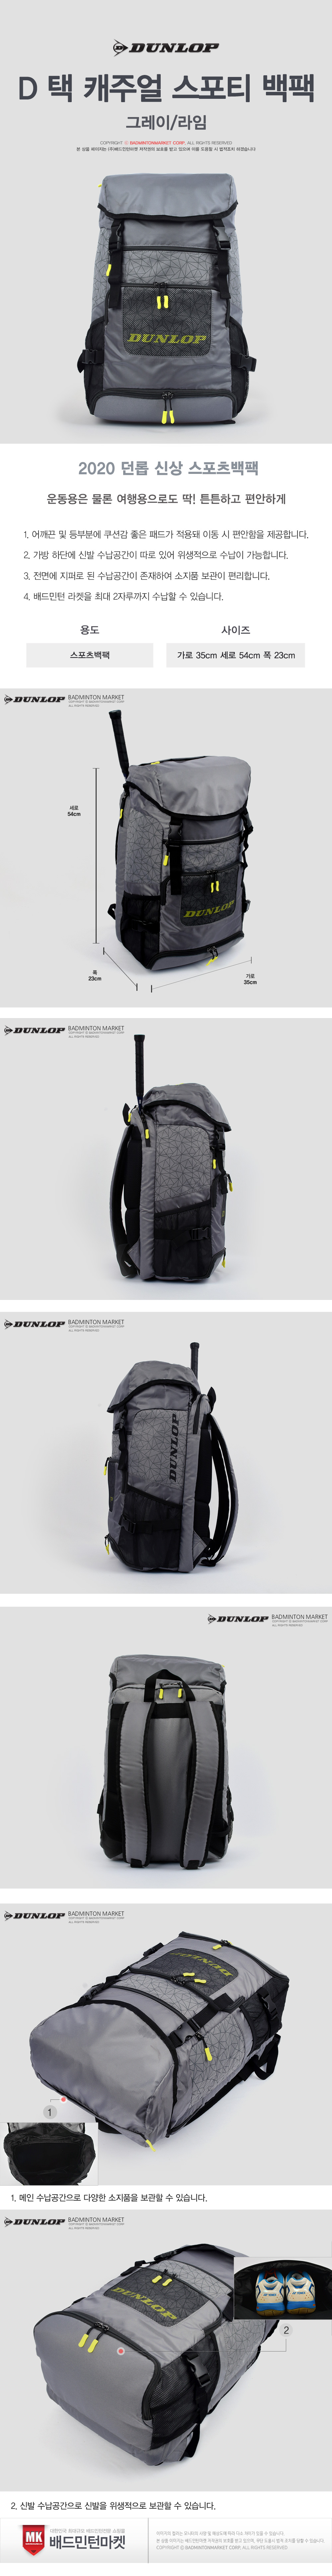 CASUAL SPORTY BACKPACK